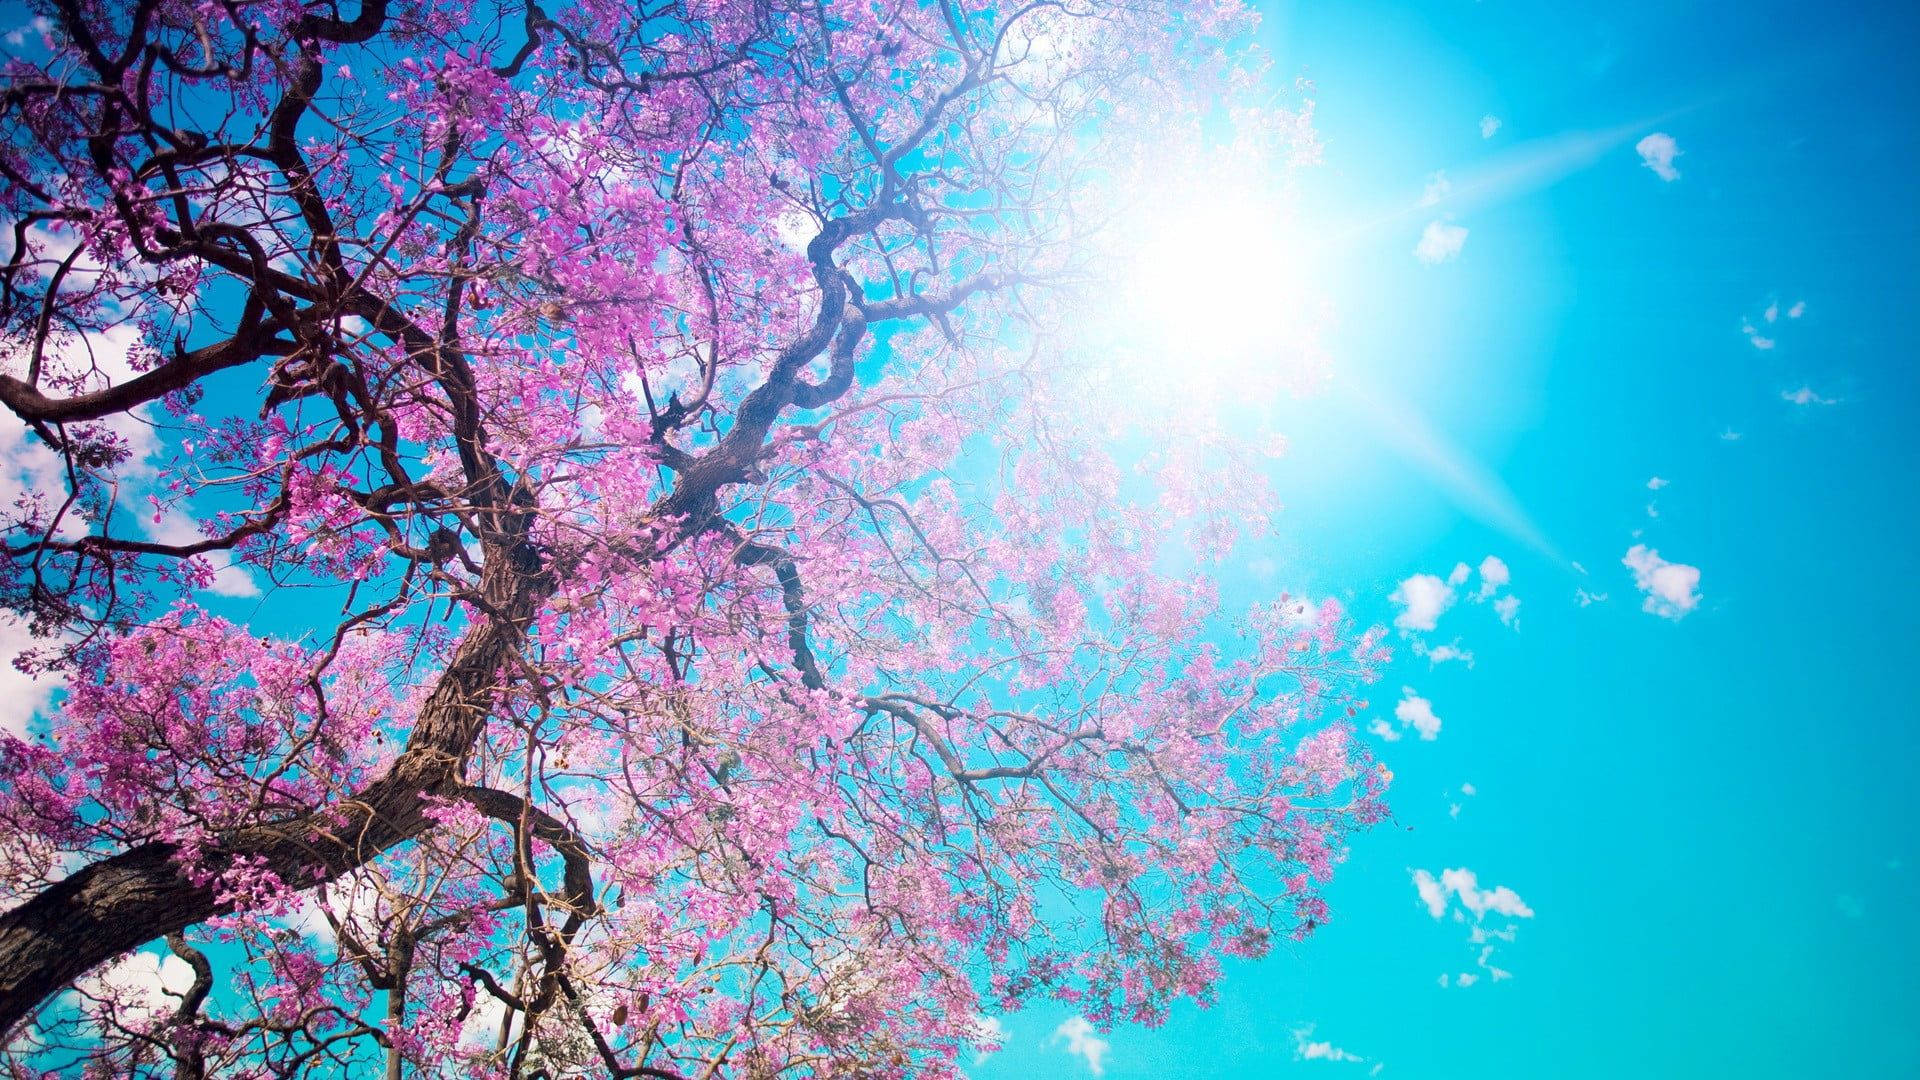 Sunny Weather With Cherry Blossom Wallpaper